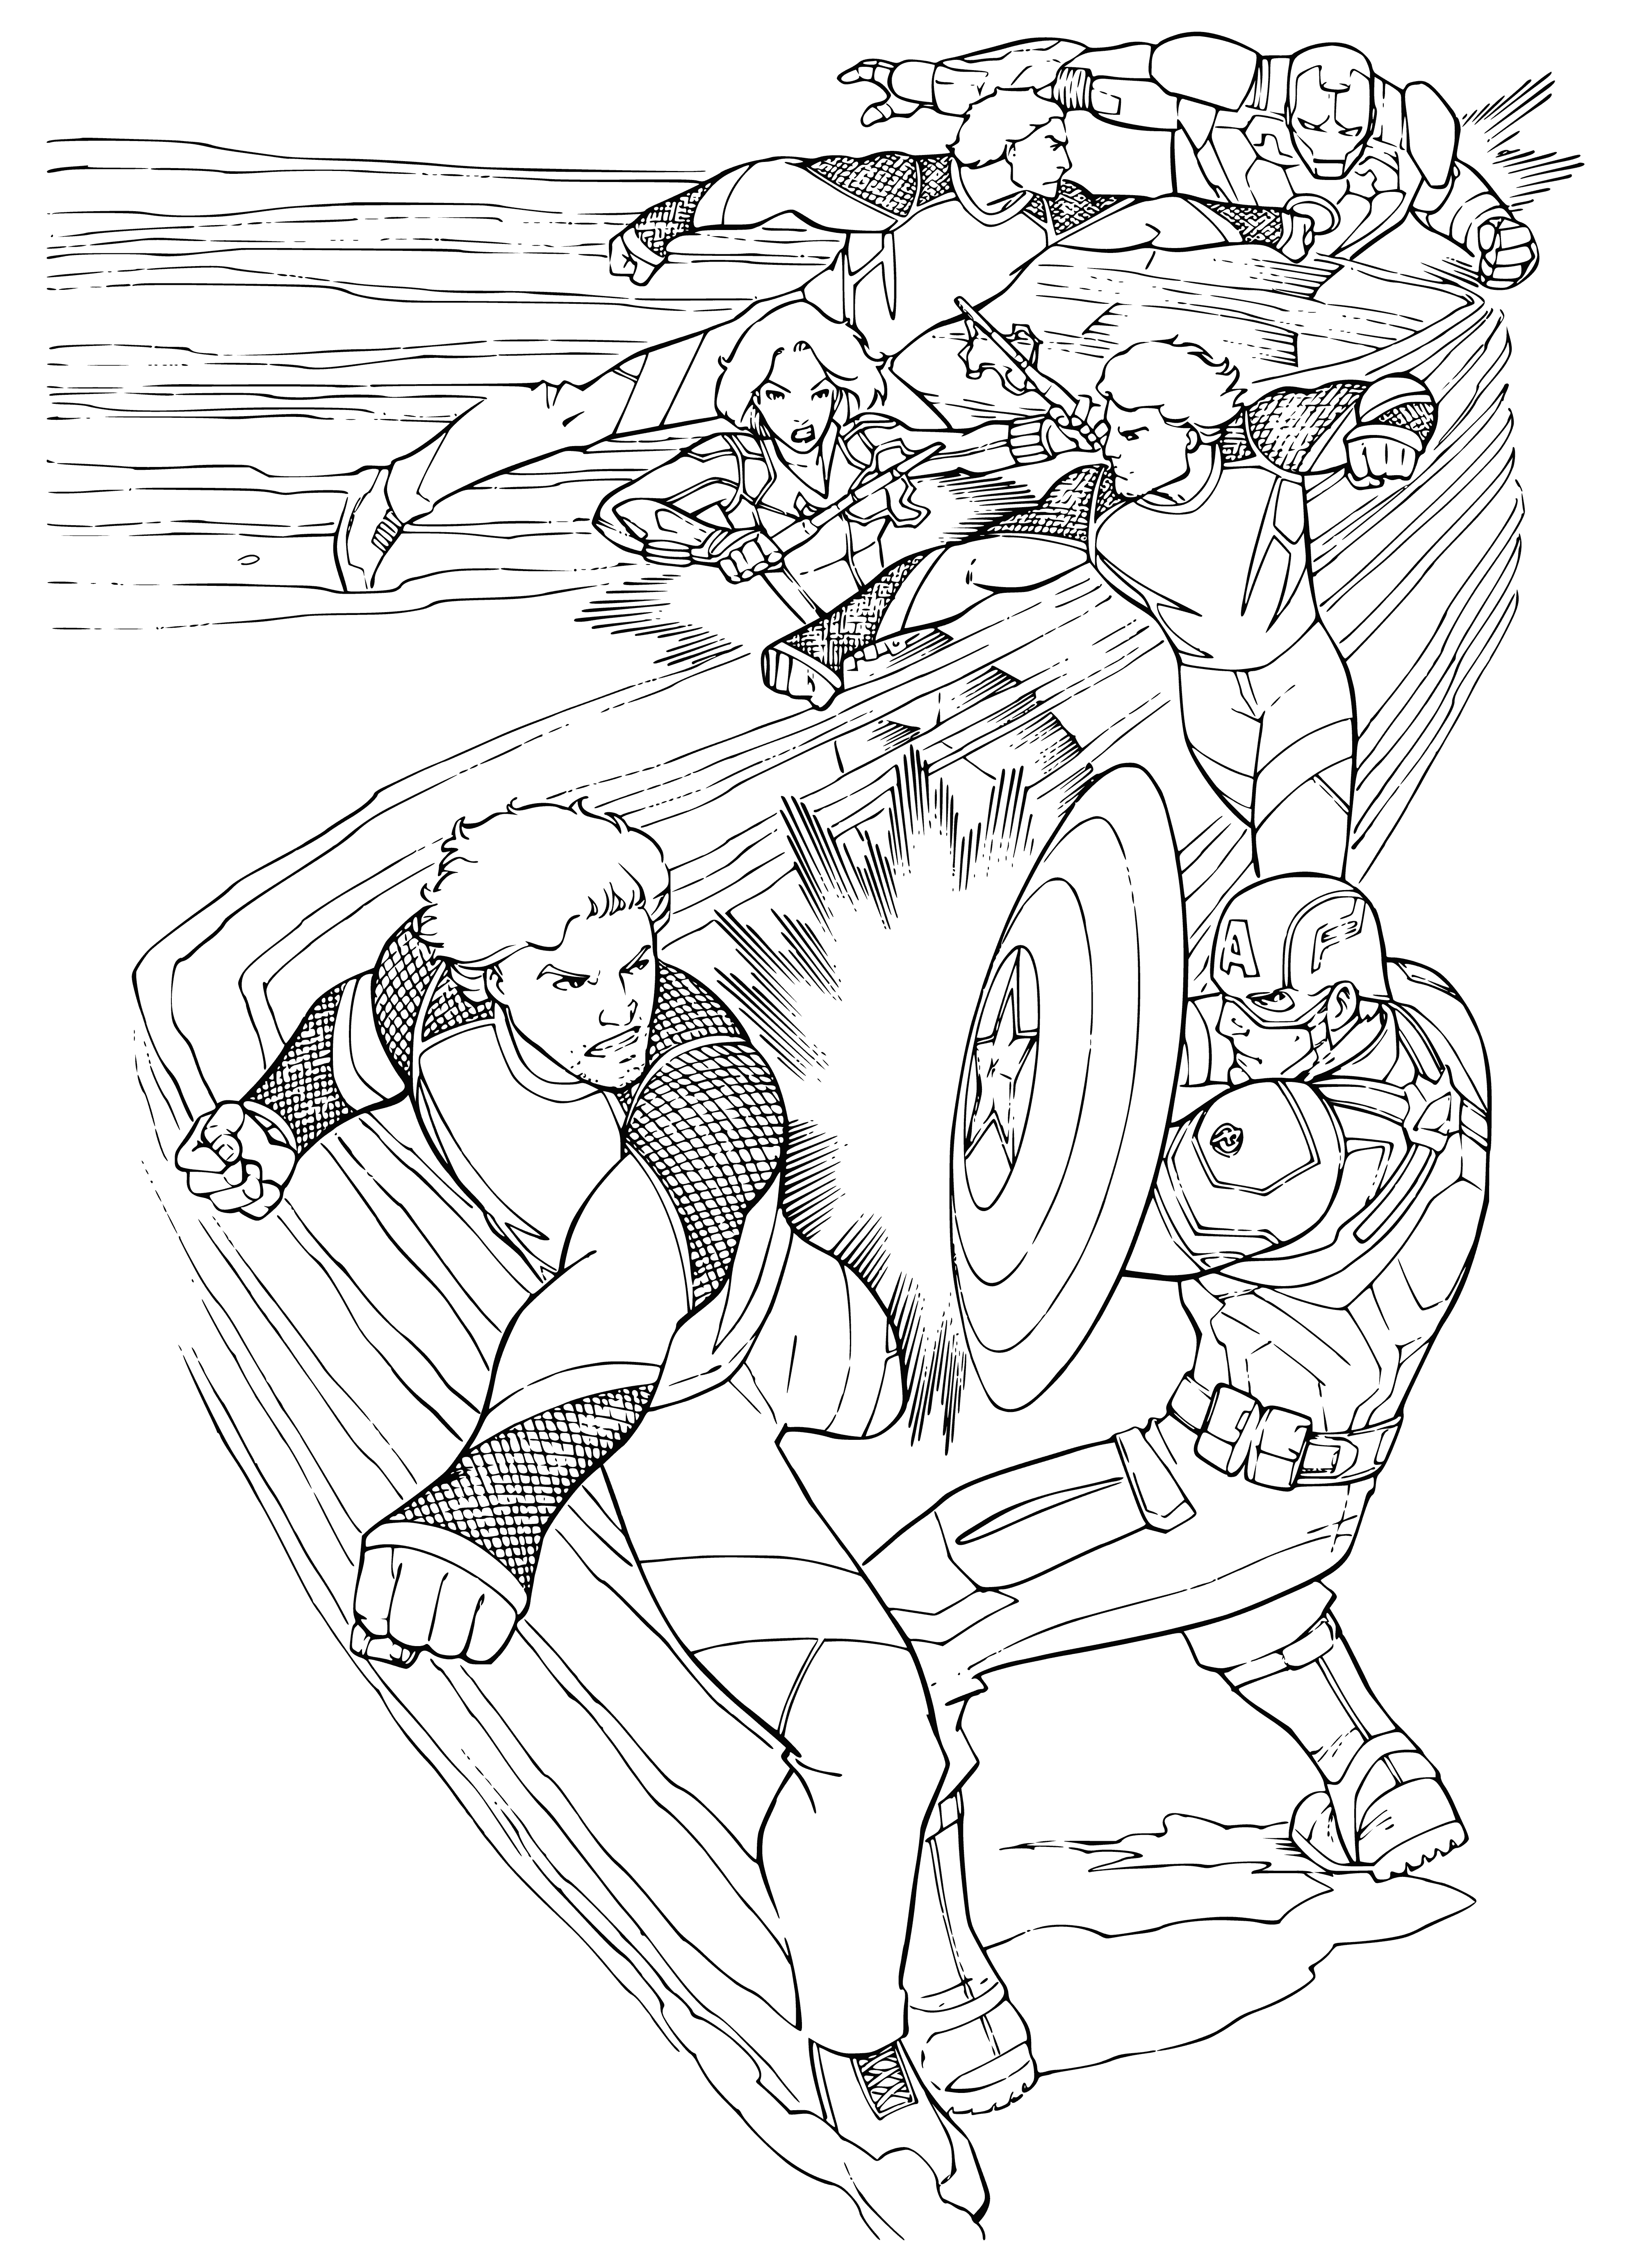 Mercury is super fast coloring page